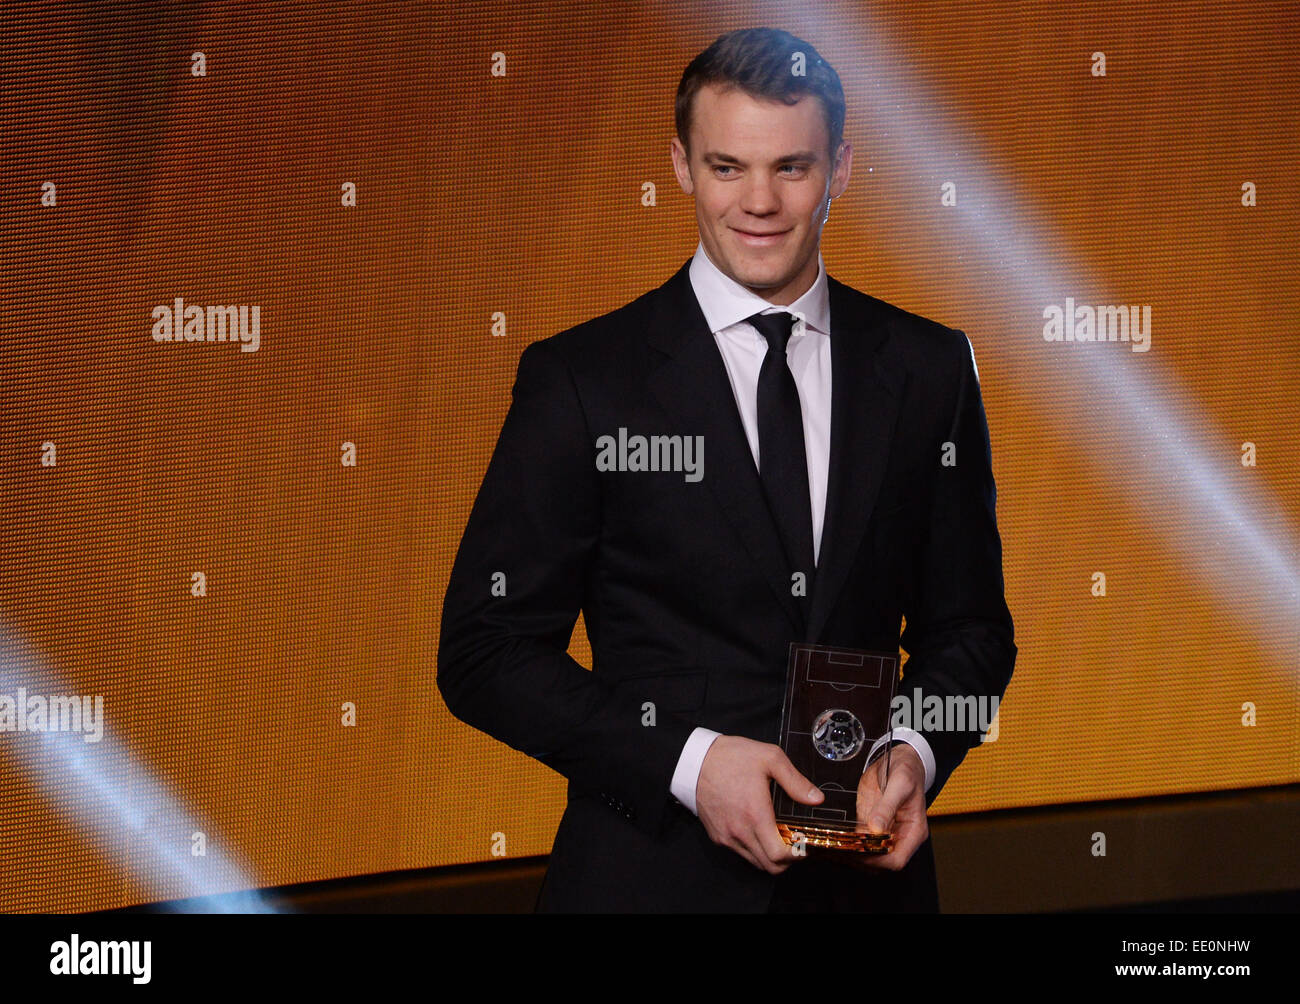 Zurich, Switzerland. 12th Jan, 2015. Manuel Neuer of Germany, one of the  nominees for the FIFA Ballon d'Or 2014 award, on stage at the FIFA Ballon d'Or  2014 gala held at the